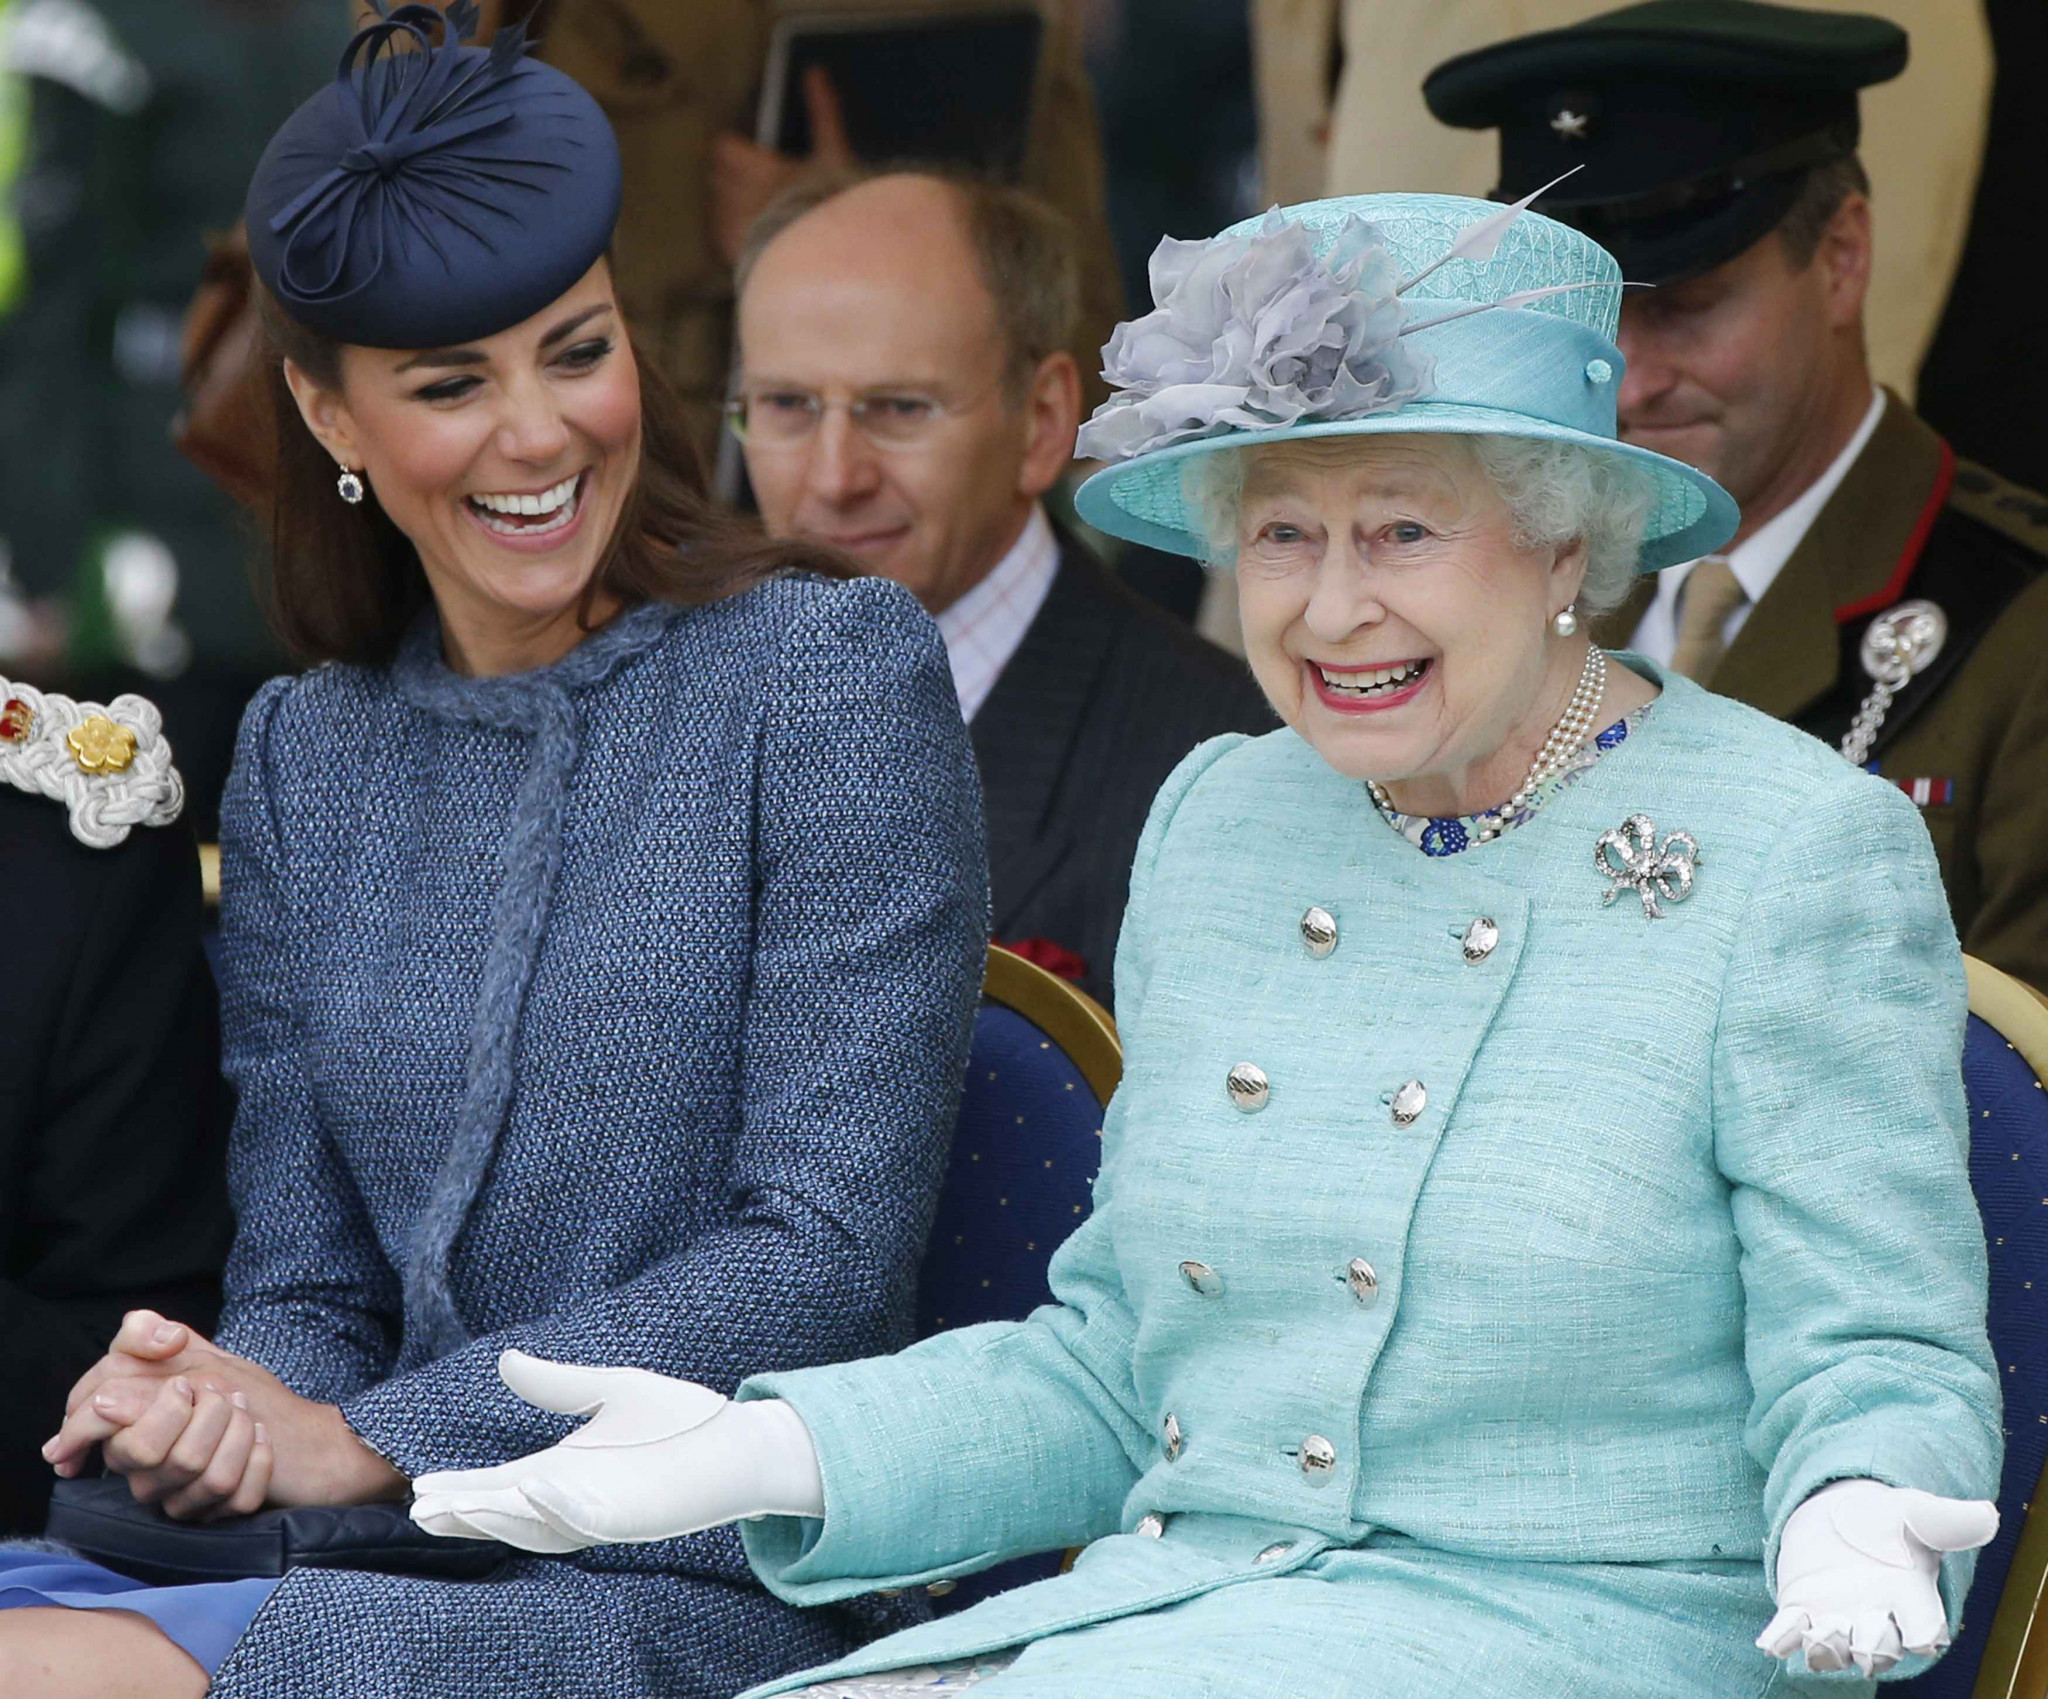 The Queen, seen with the Duchess of Cambridge at Royal Ascot races, is a keen fan of horse racing © Getty Images